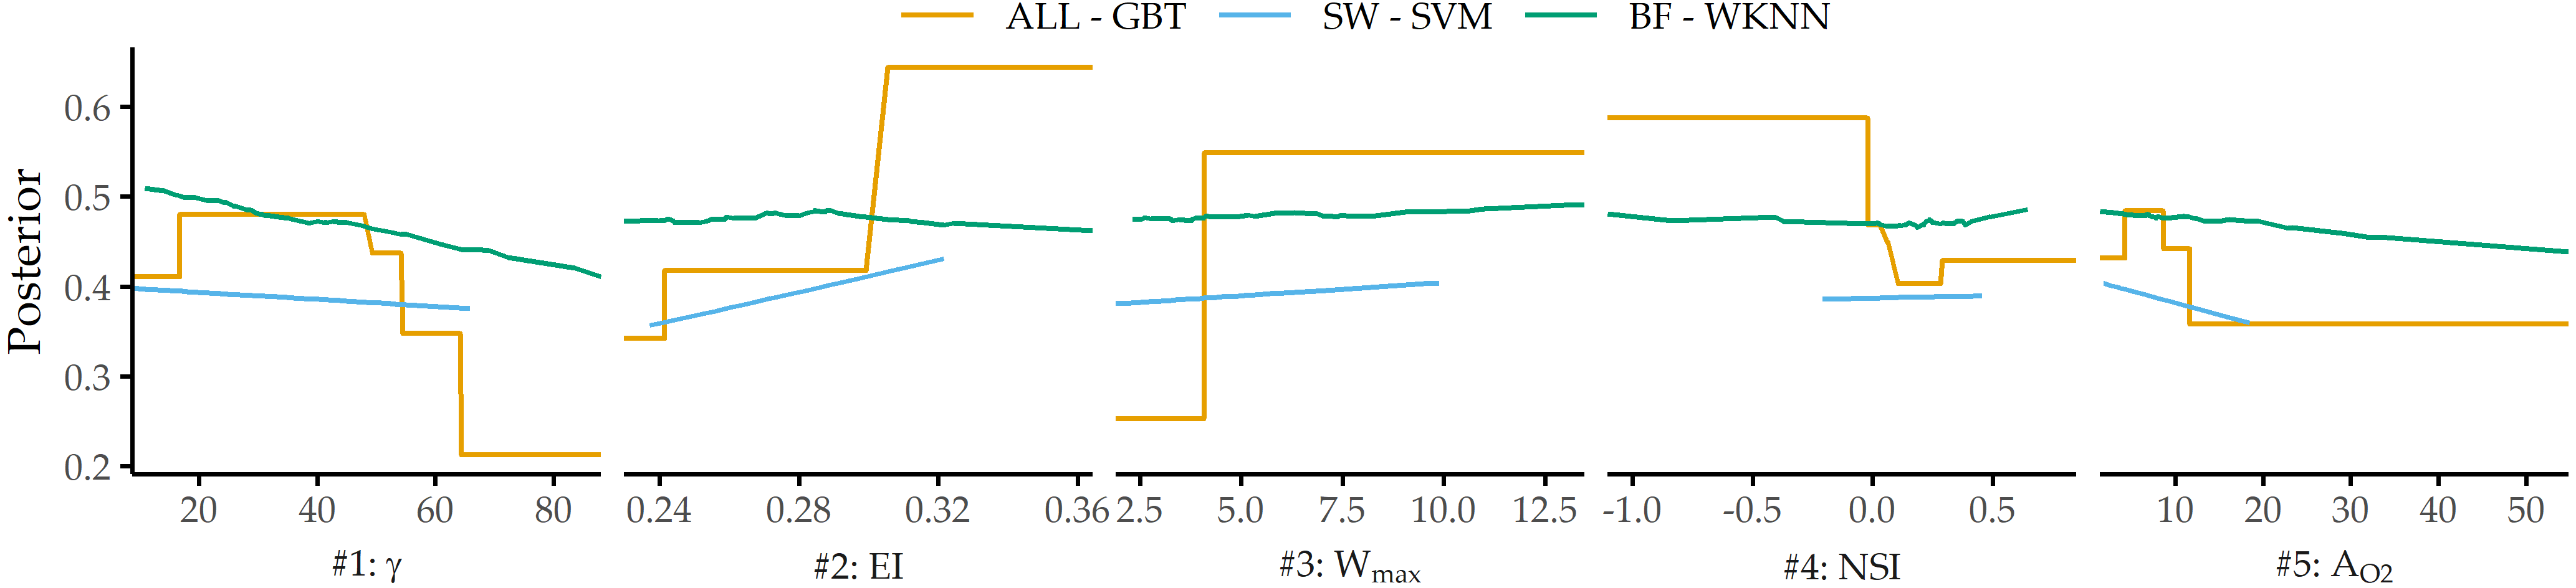 PDP curves for top 5 predictors on ALL - GBT for each data subset’s best model.